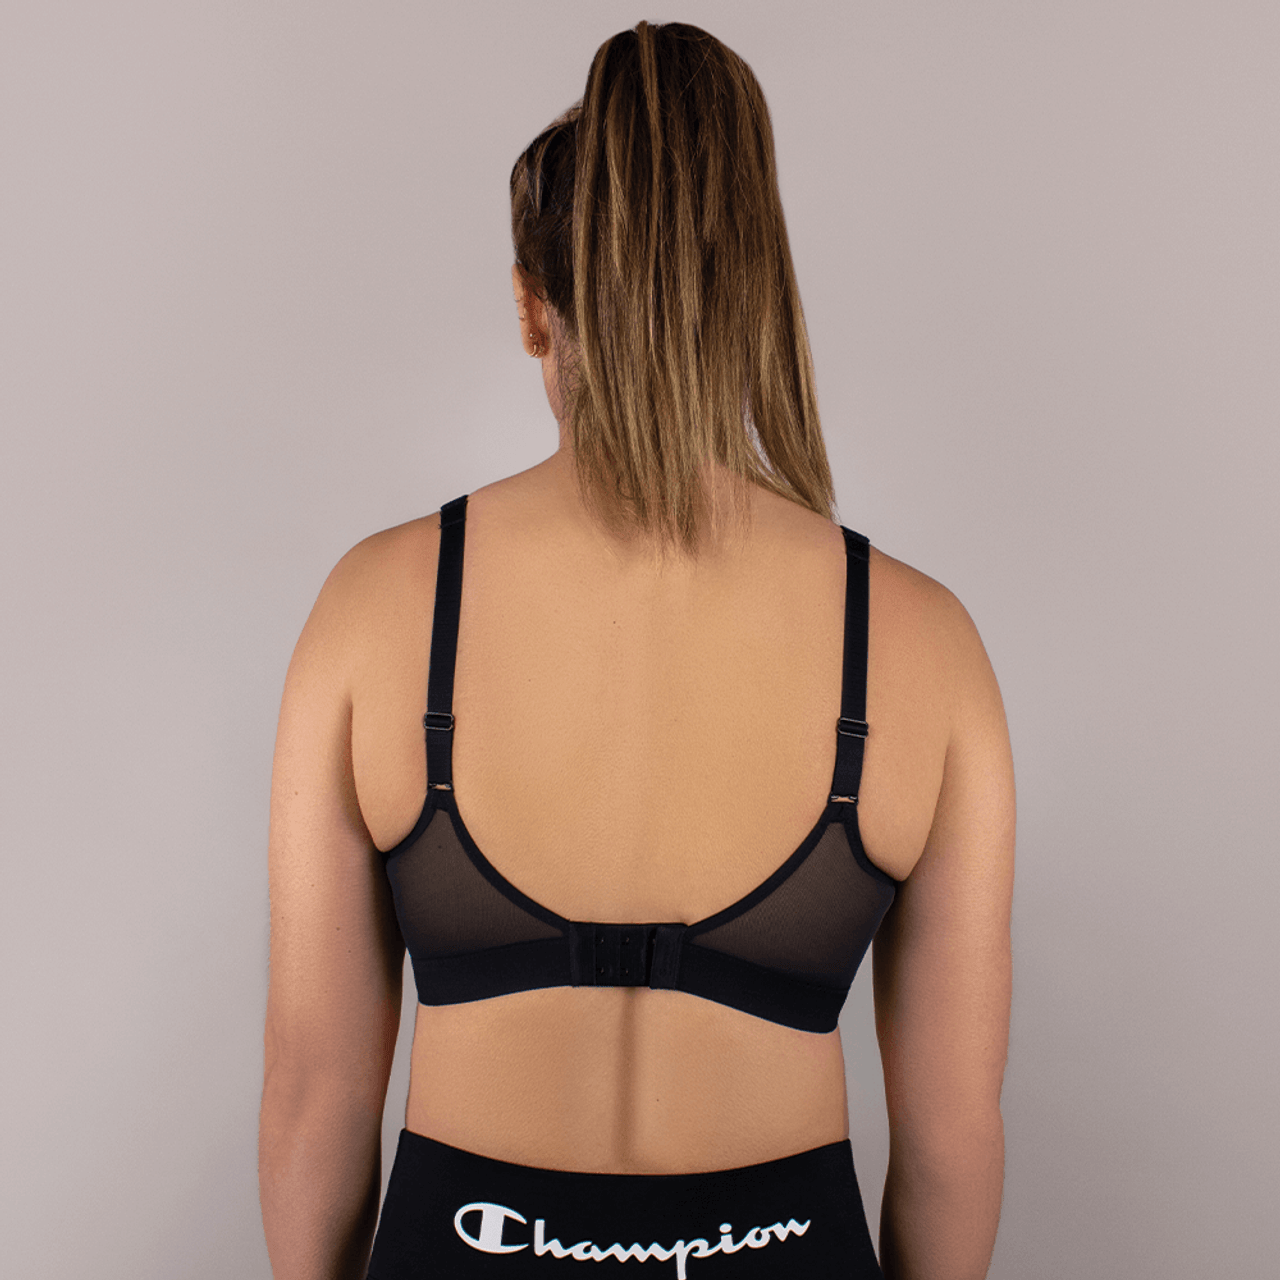 Women Underwear Sports Bra Shockproof Push Support Back Closure Elastic  Sweat Absorption No Steel Ring Women Jog g Br iere Underwear Sports Bra  Without Steel Ring